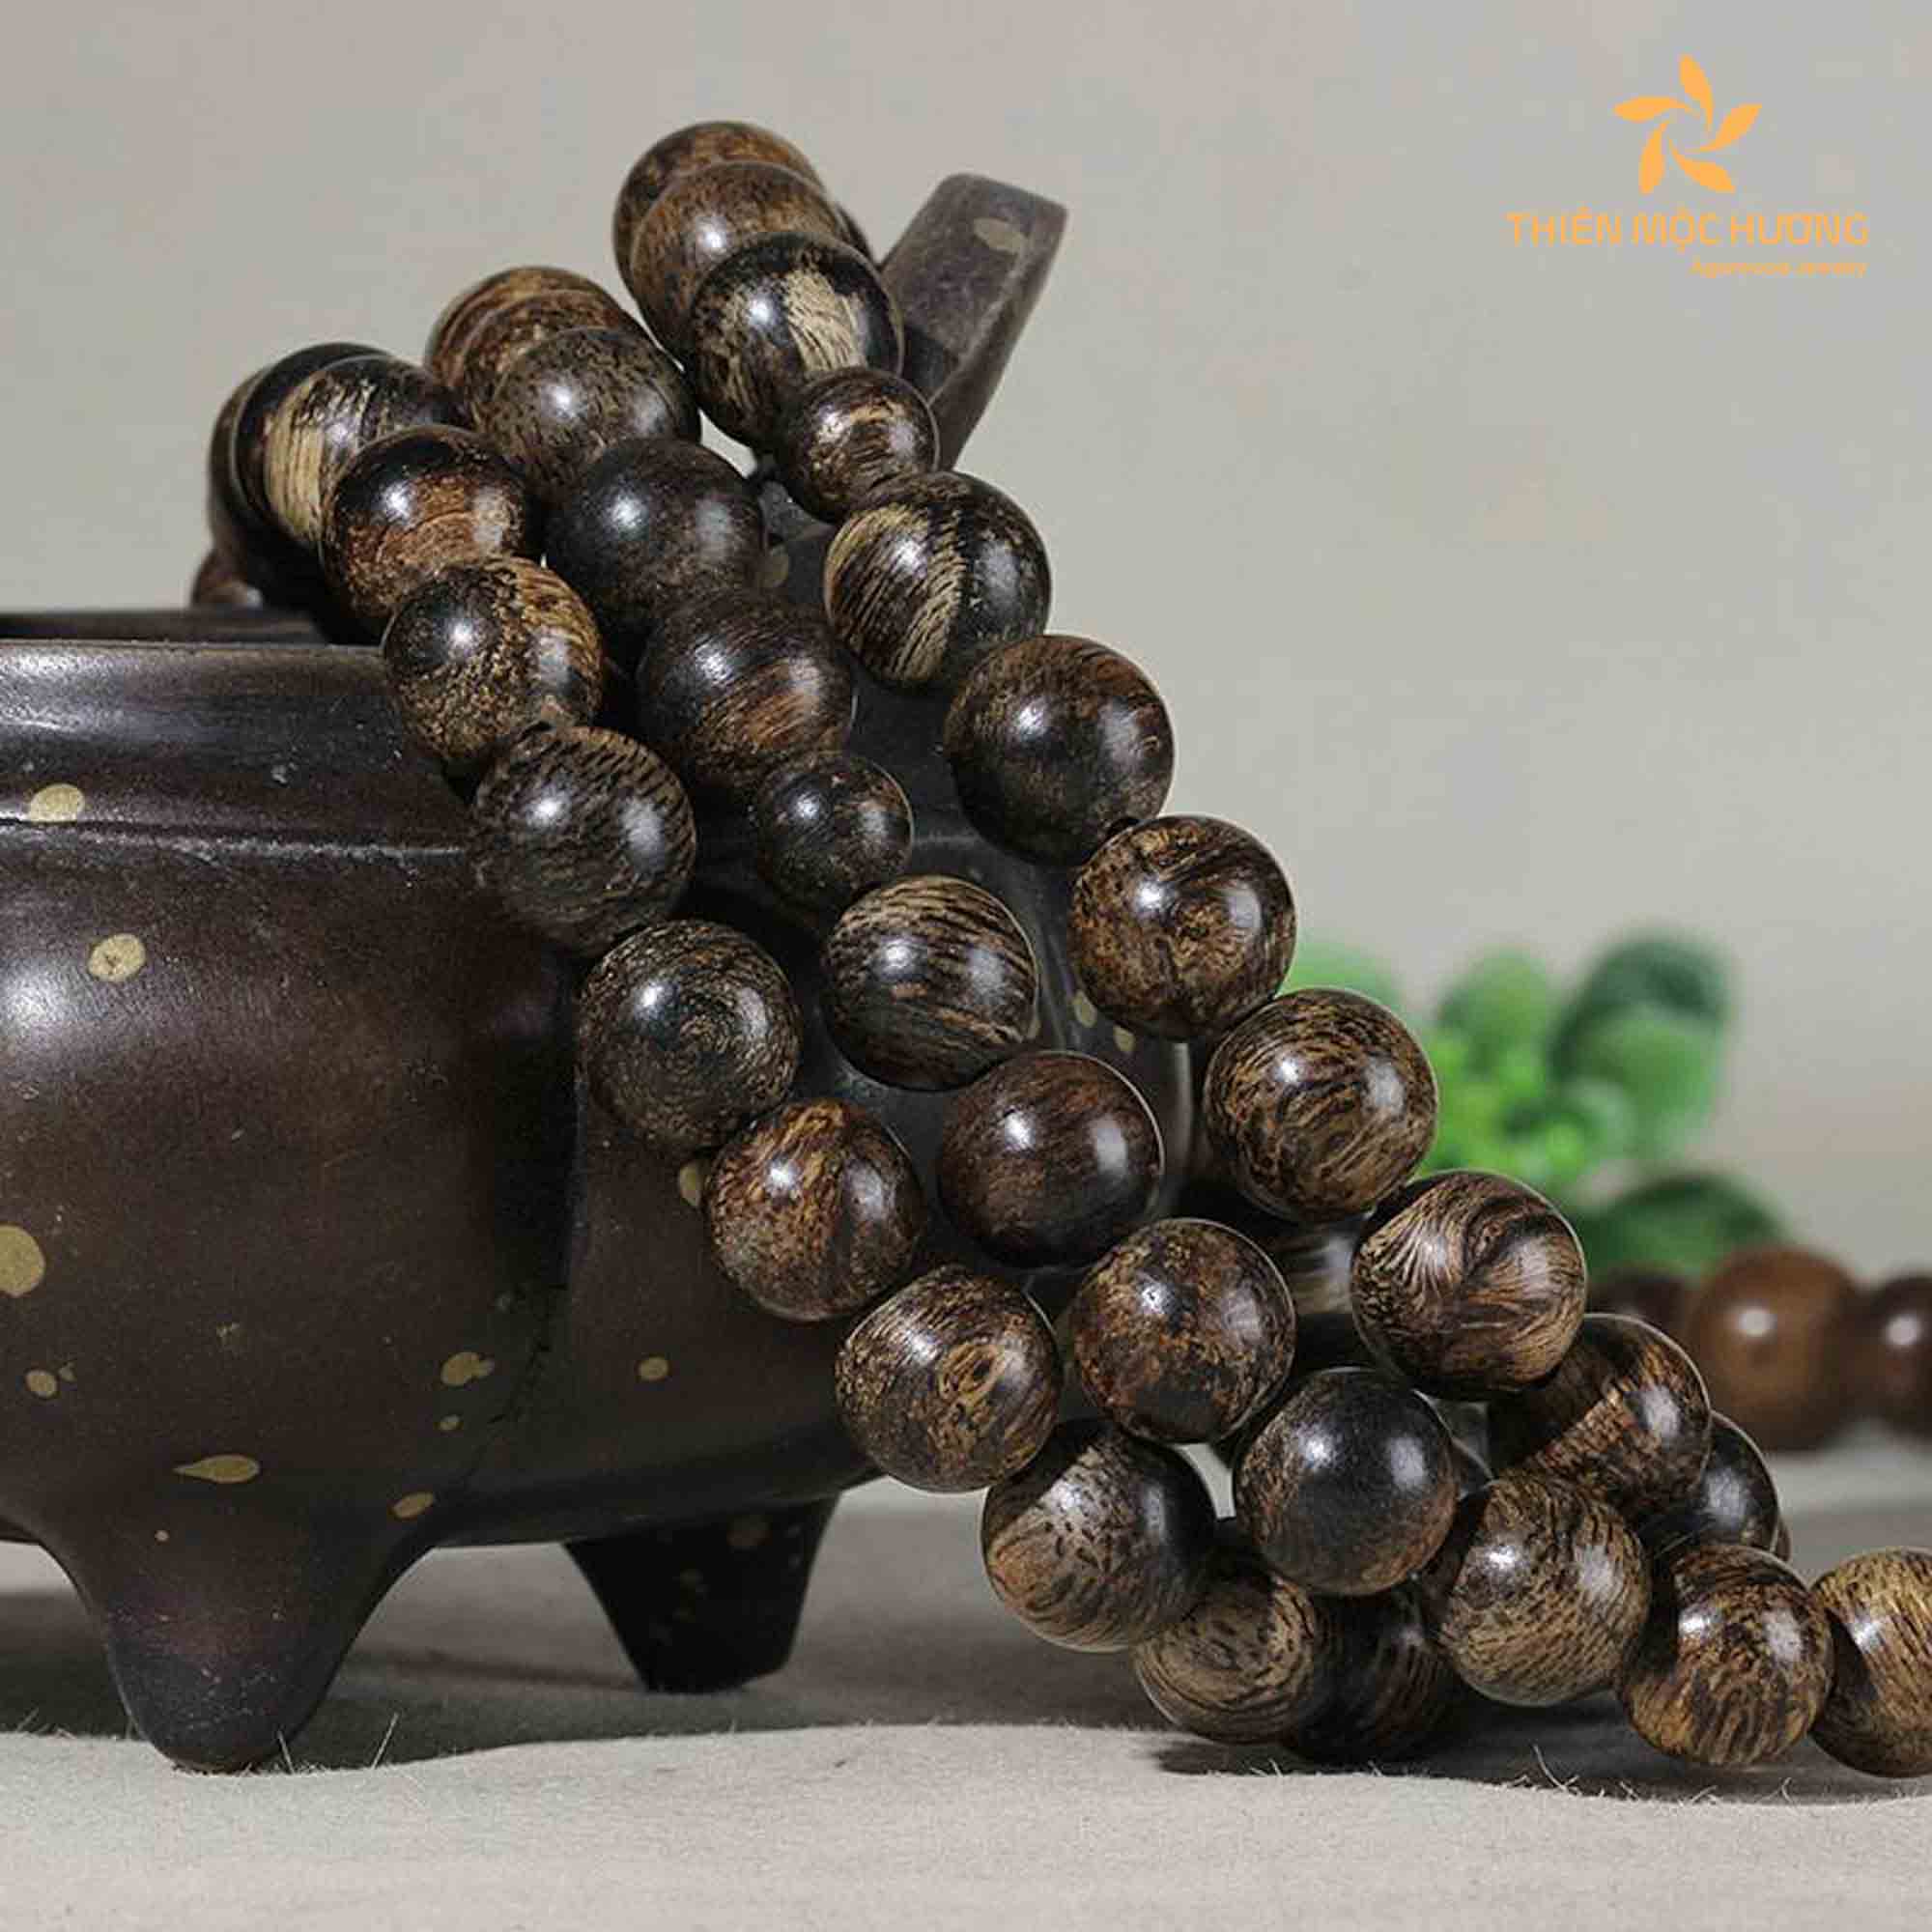 different types of agarwood mala beads necklaces can originate from various agarwood sources